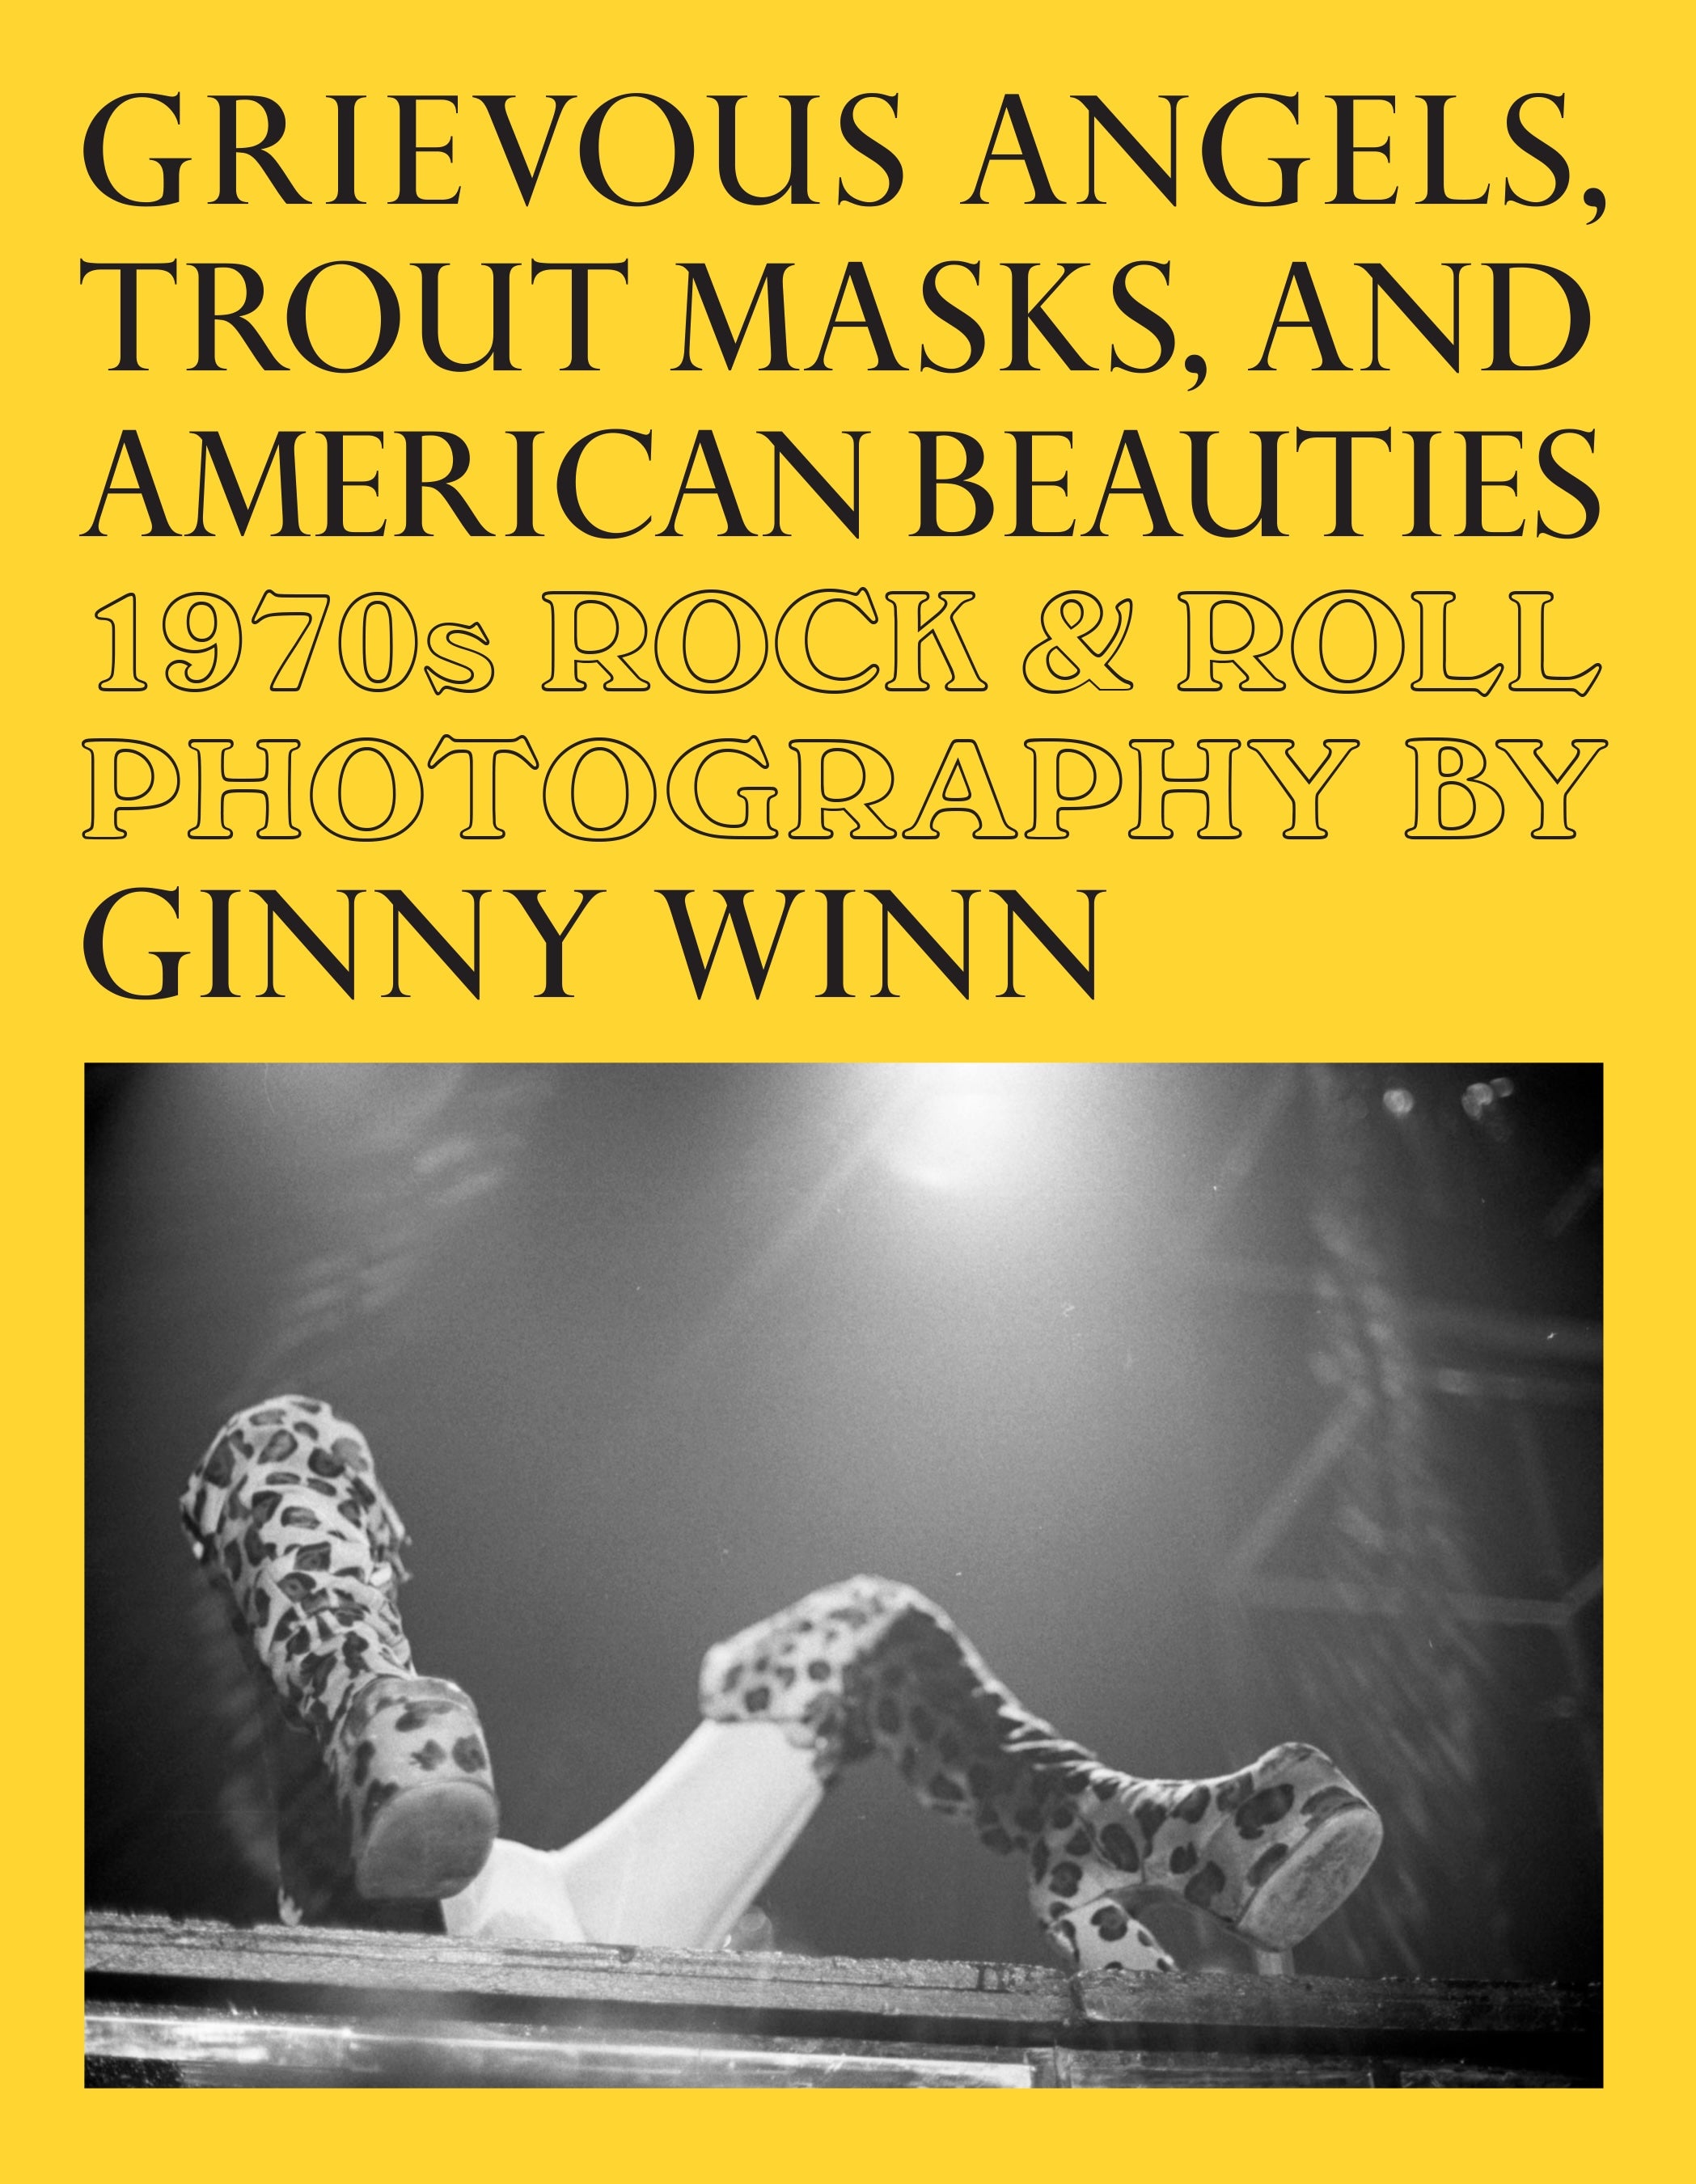 GRIEVOUS ANGELS TROUT MASKS AND AMERICAN BEAUTIES TRADE PAPERBACK 1970S ROCK & ROLL PHOTOGRAPHY OF GINNY WINN